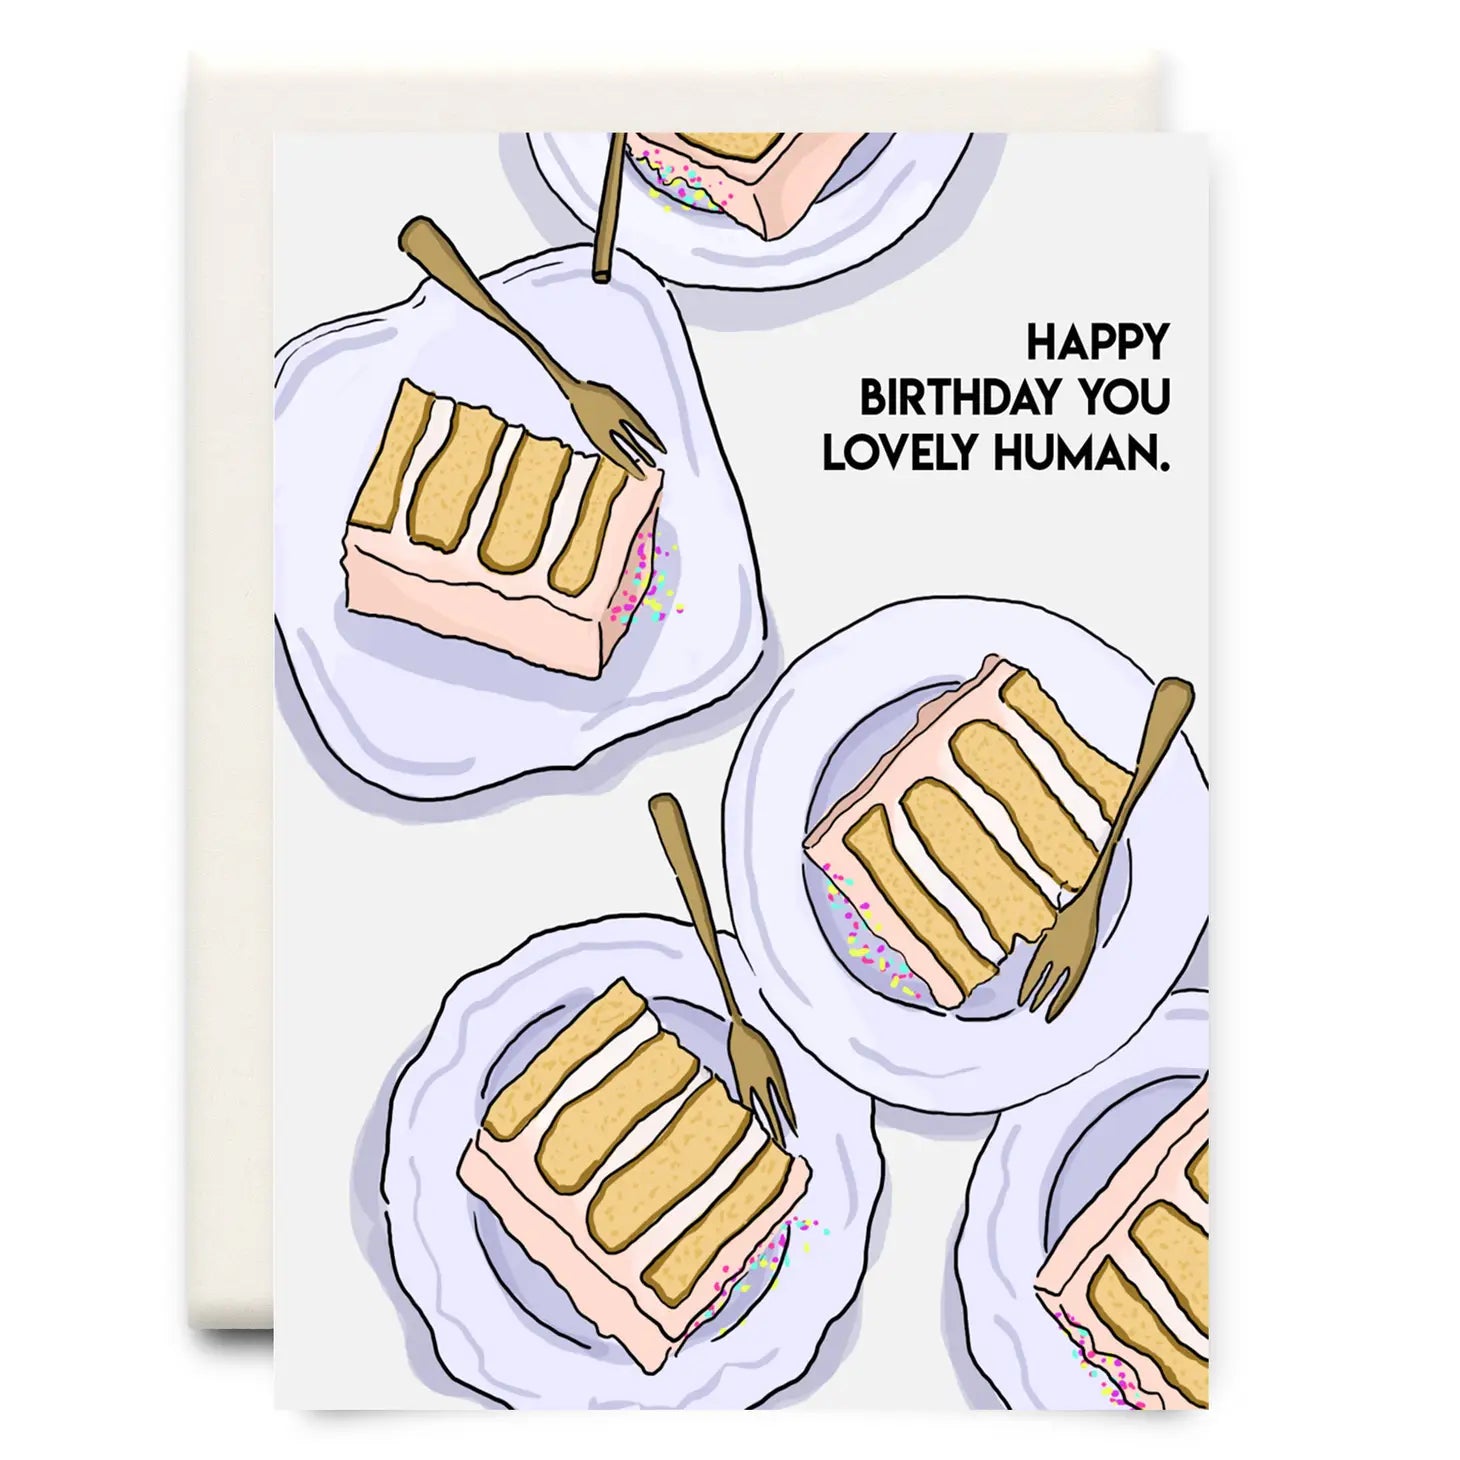 Inkwell Cards “Happy Birthday You Lovely Human” Card